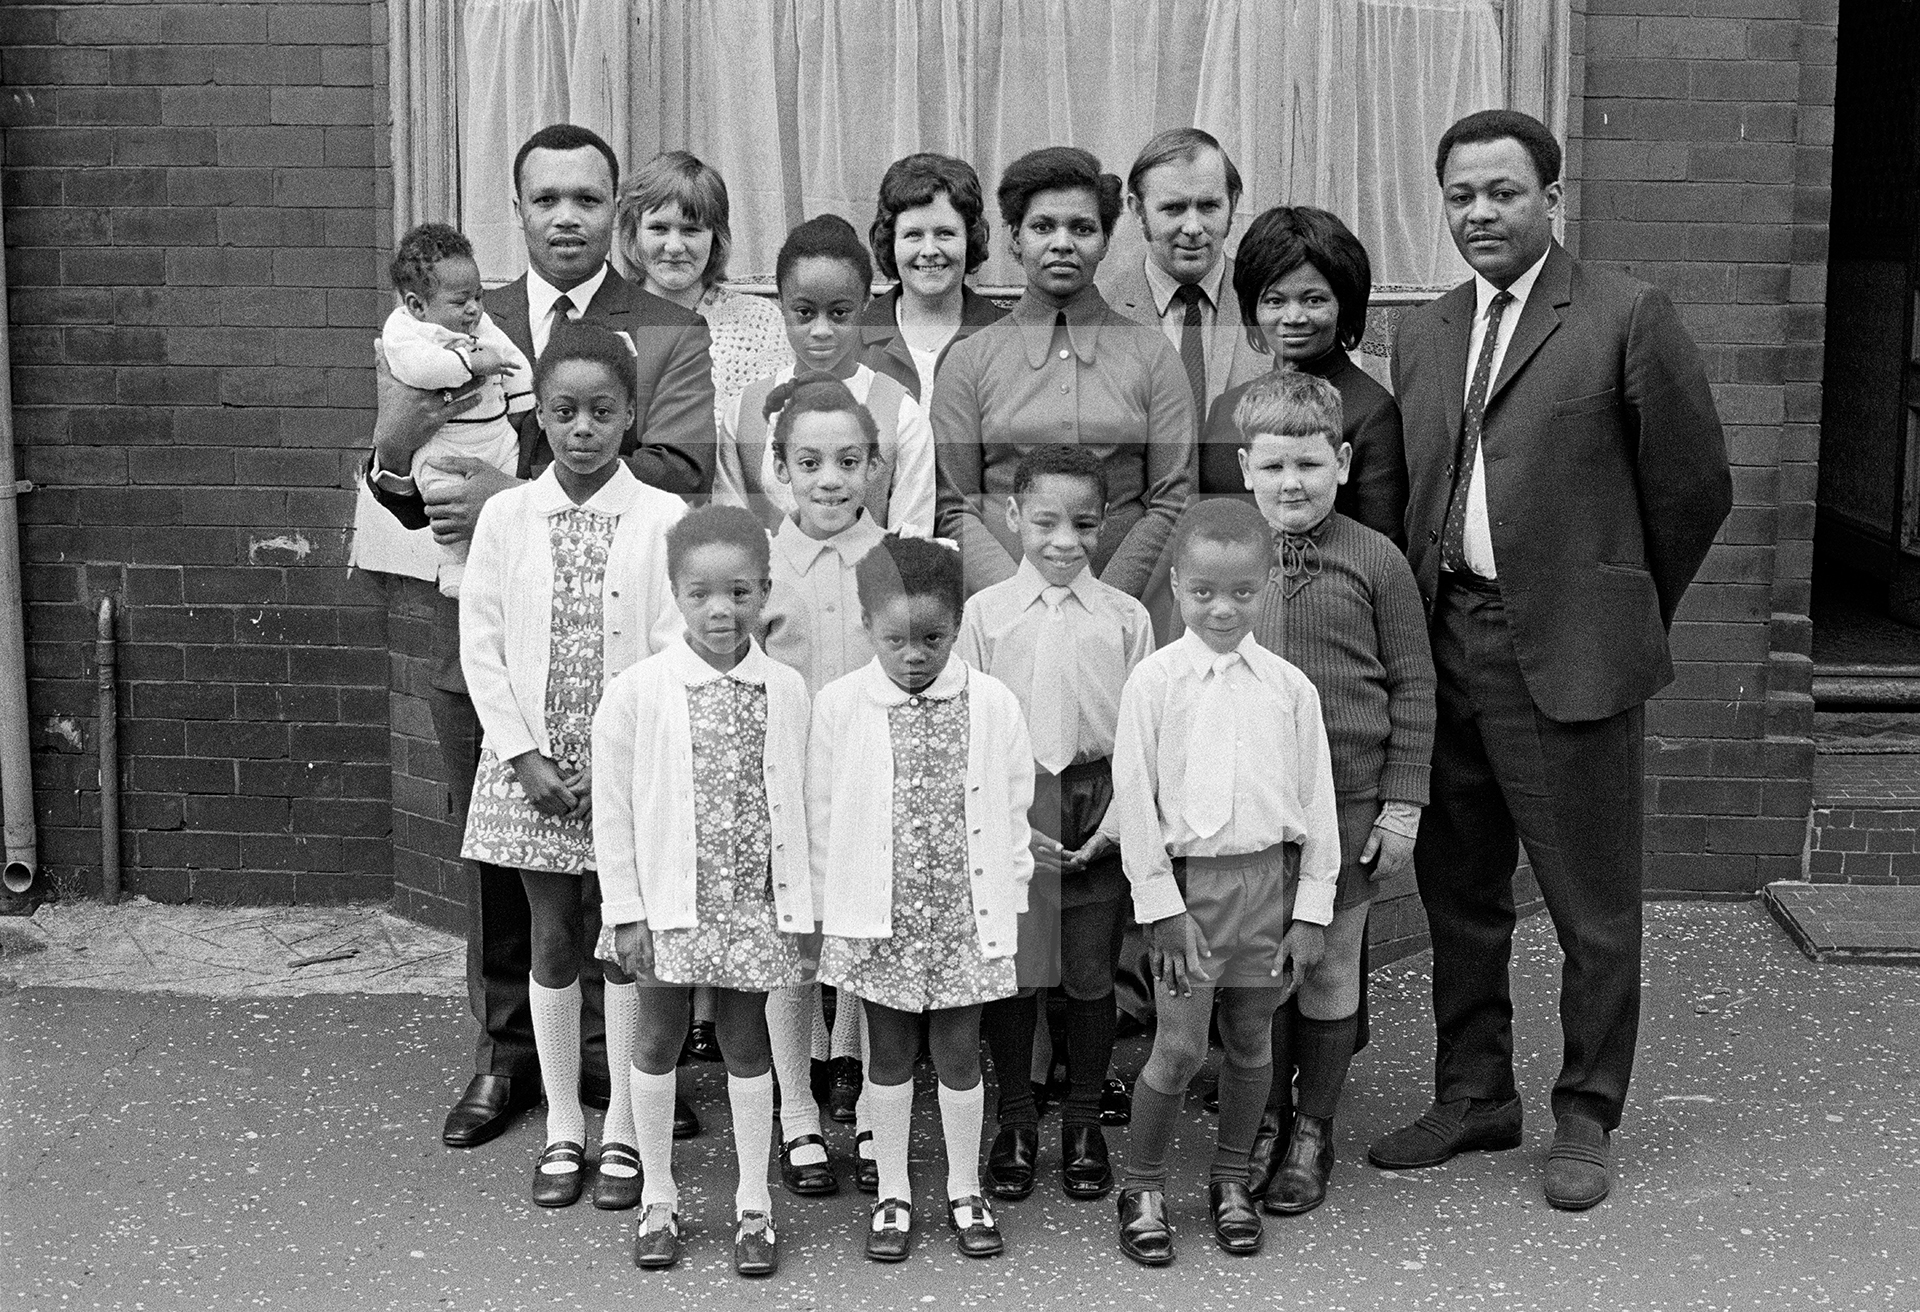 Group portrait at a christening. Moss Side, Manchester. 1972 by Daniel Meadows